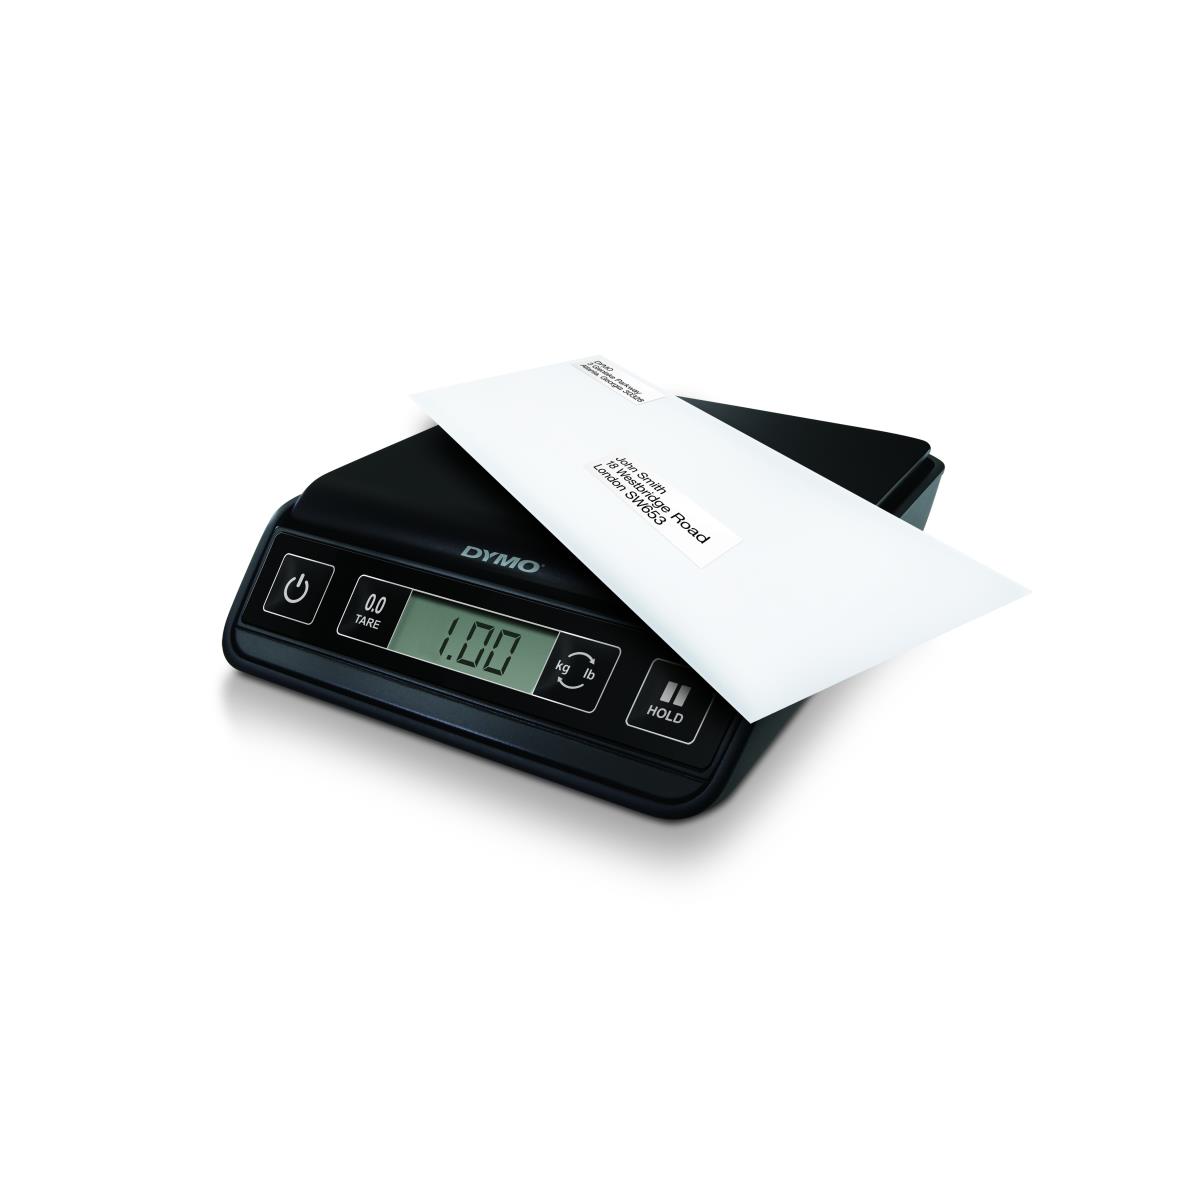 Dymo S0929000 M5 Mailing Scales, 5 kg